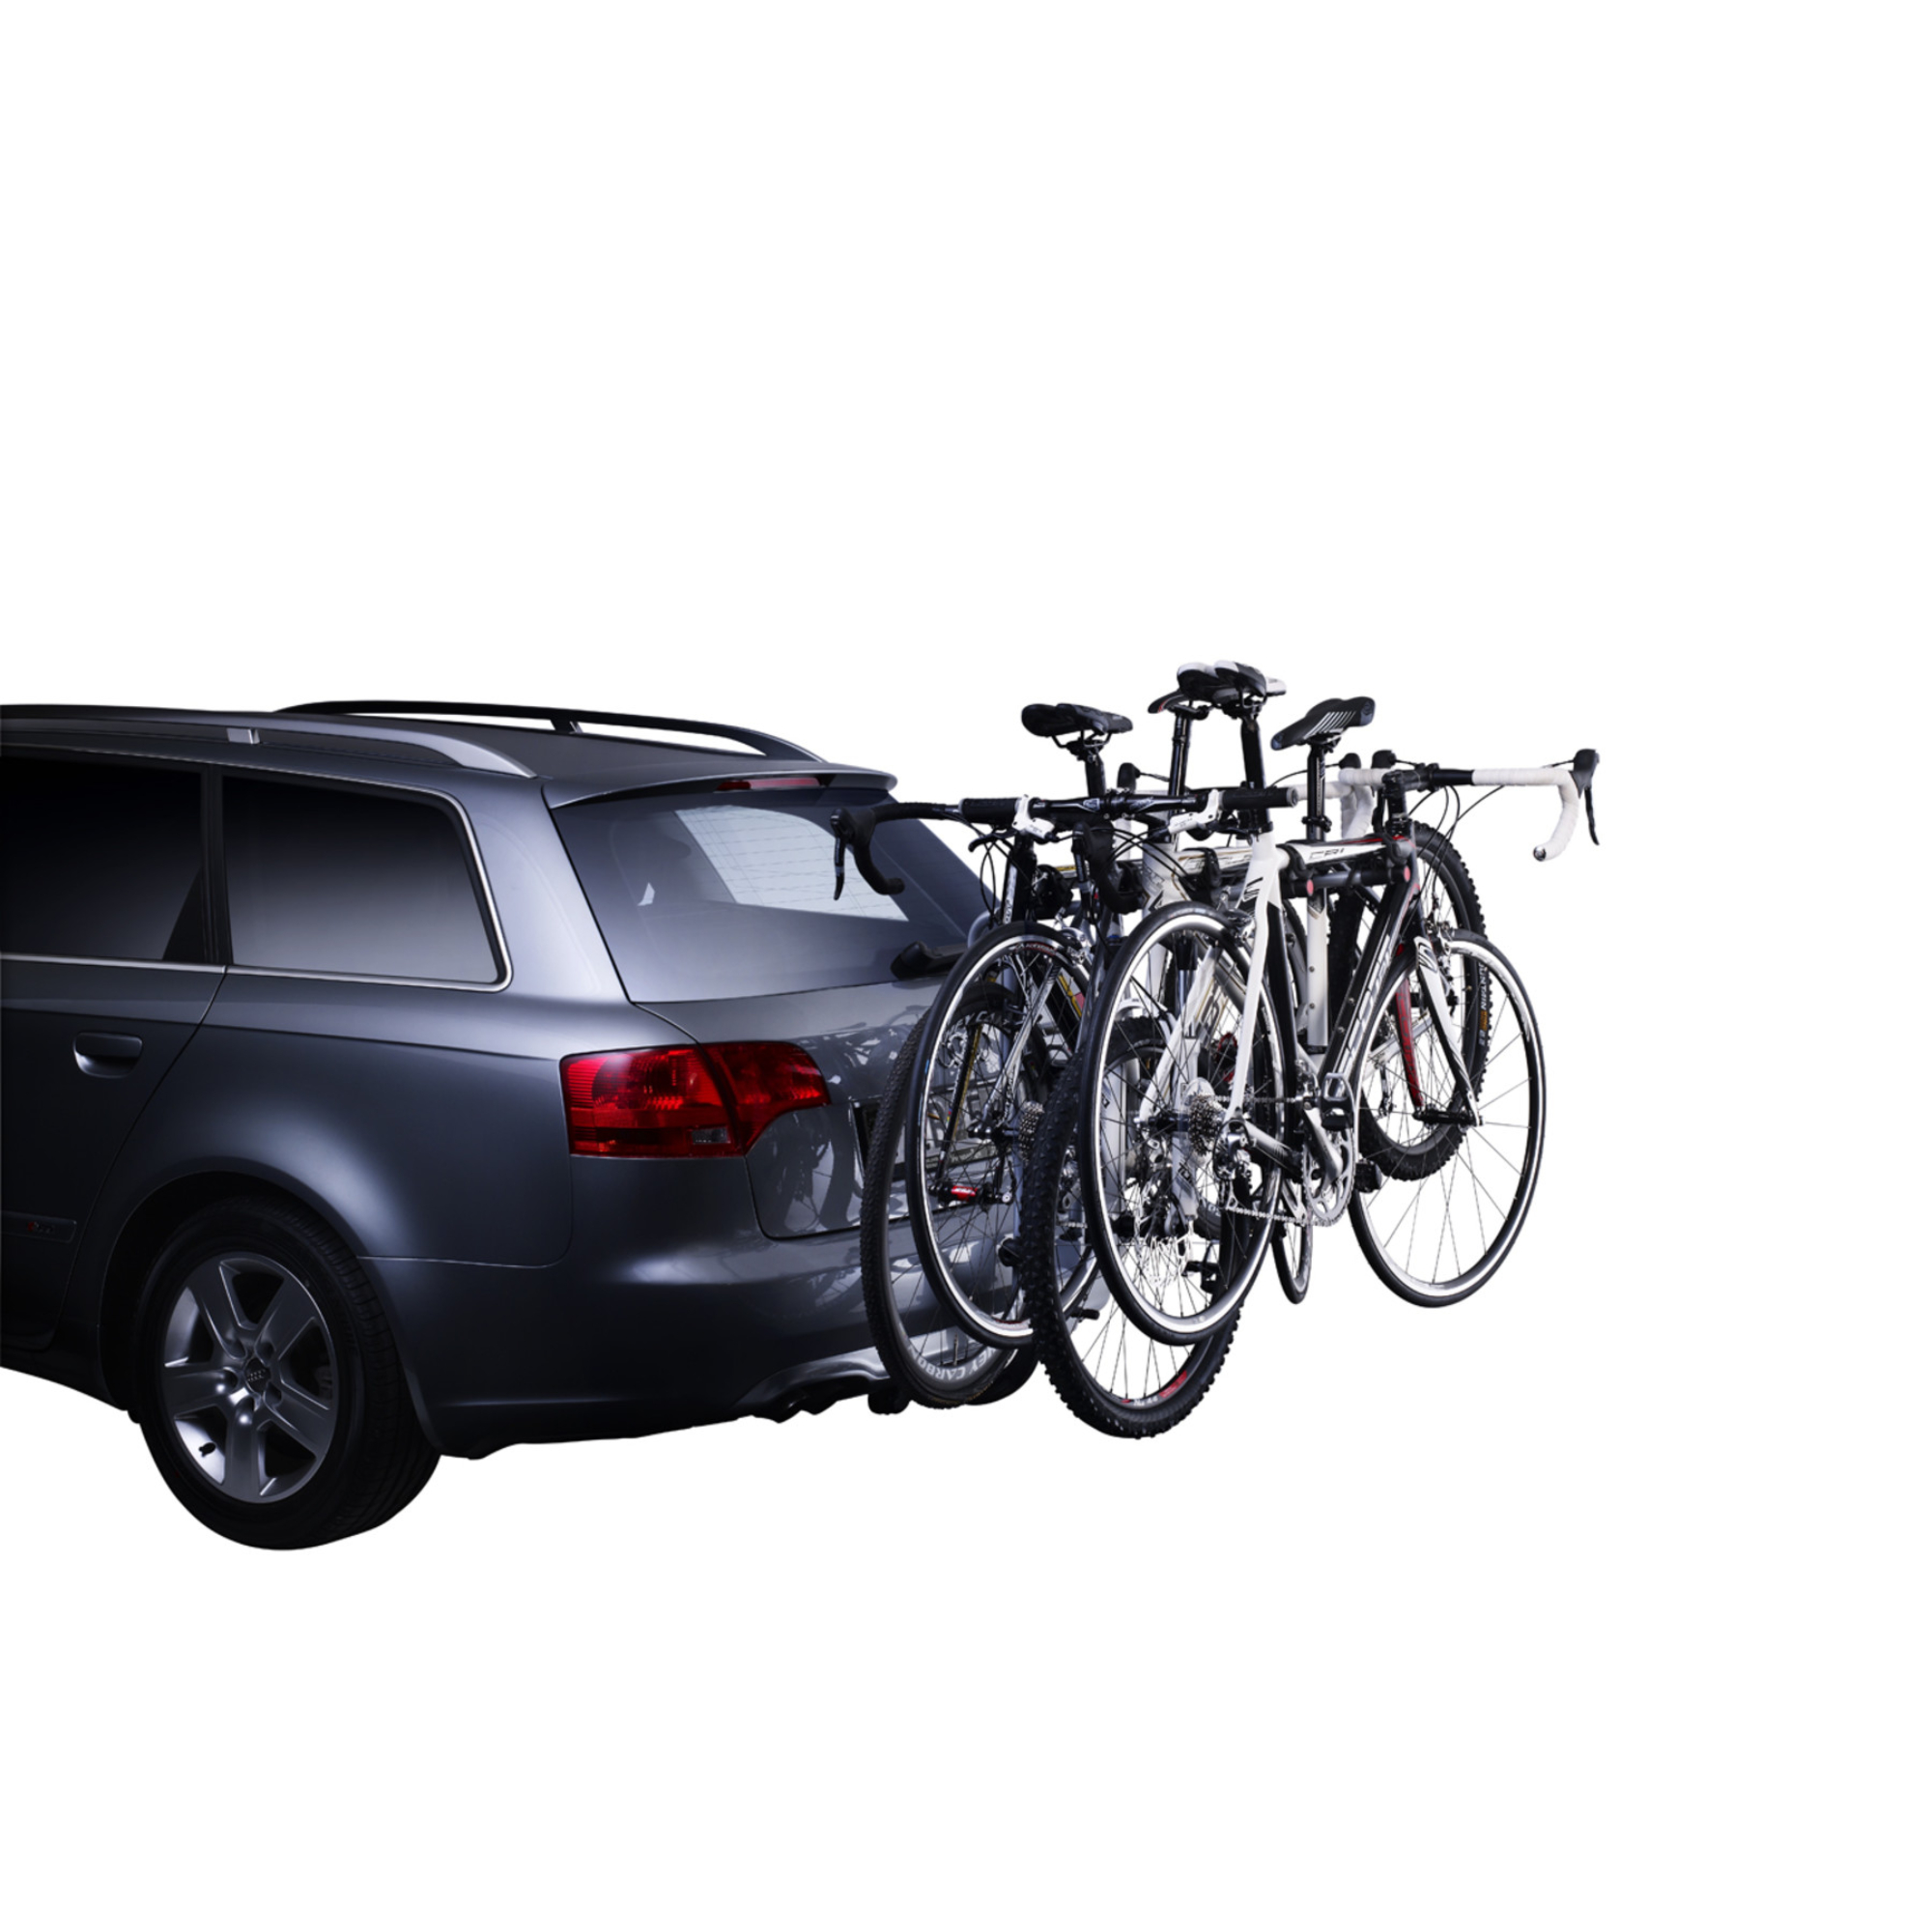 4 bike carrier for tow bar